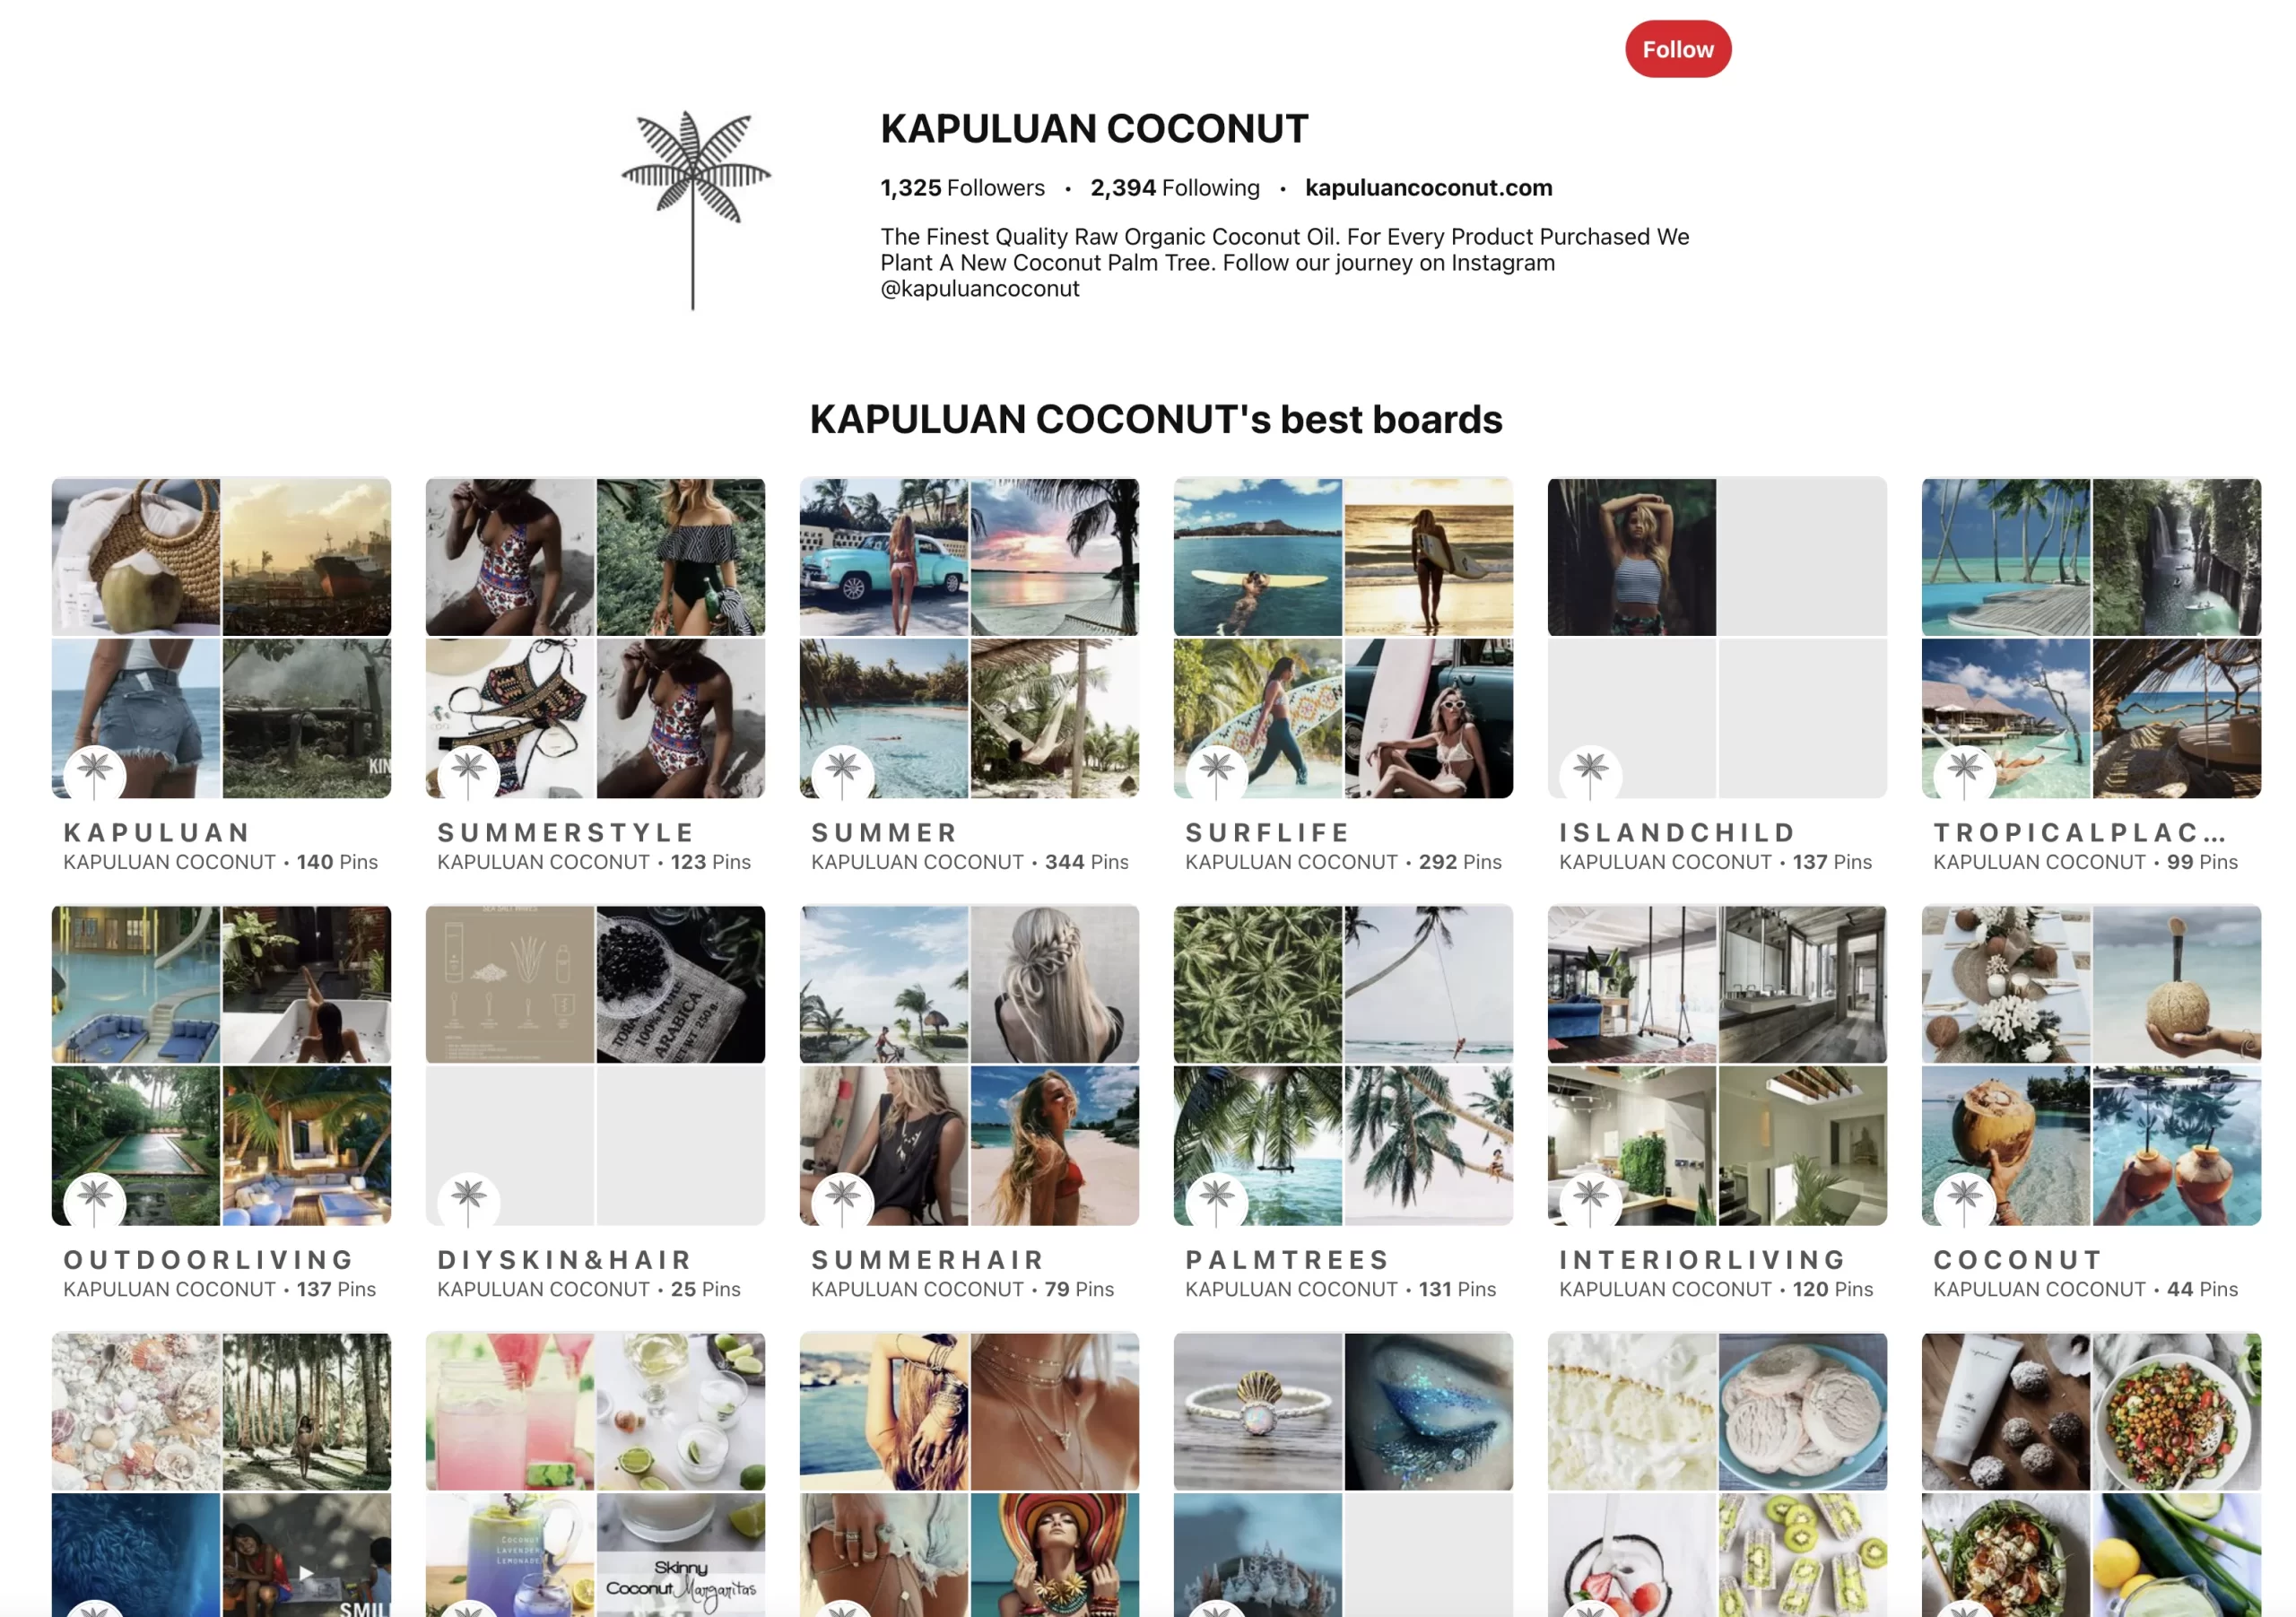 A pinterest profile page displaying various boards titled 'kapuluan coconut' with themes like summer style, surf life, island chill, tropical paradise, and more, featuring images related to beaches, palm trees, and coconuts.